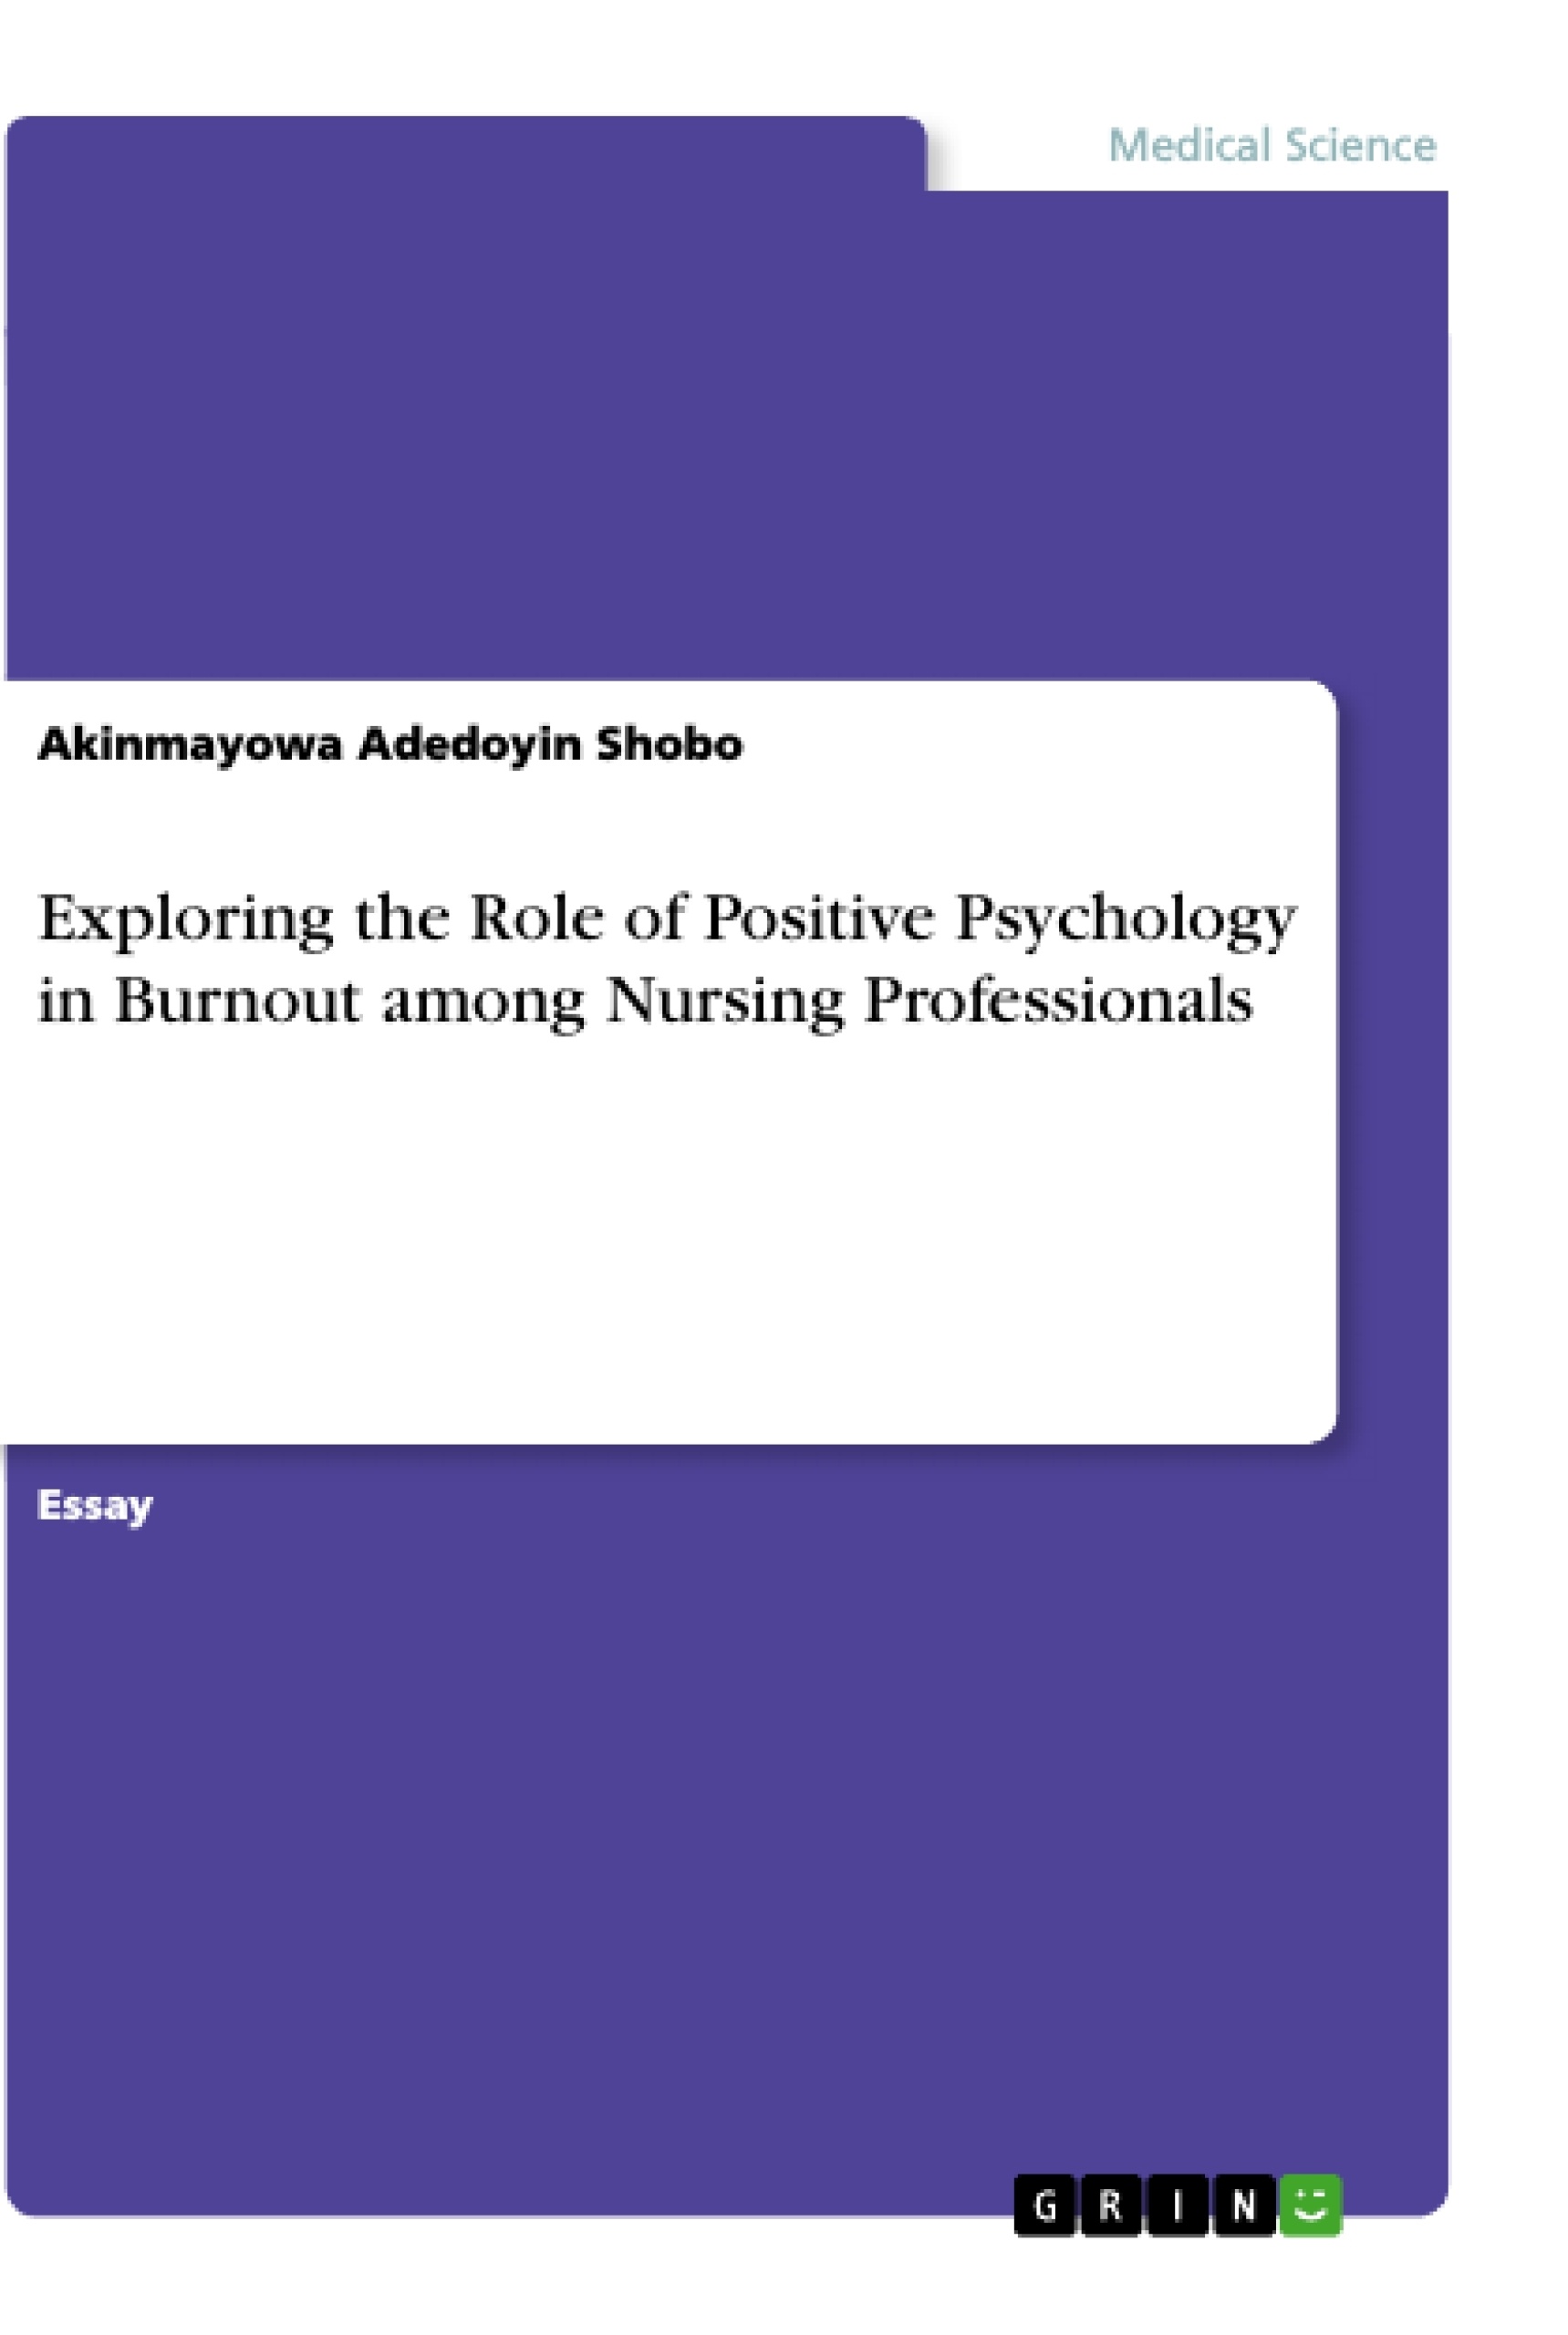 Title: Exploring the Role of Positive Psychology in Burnout among Nursing Professionals